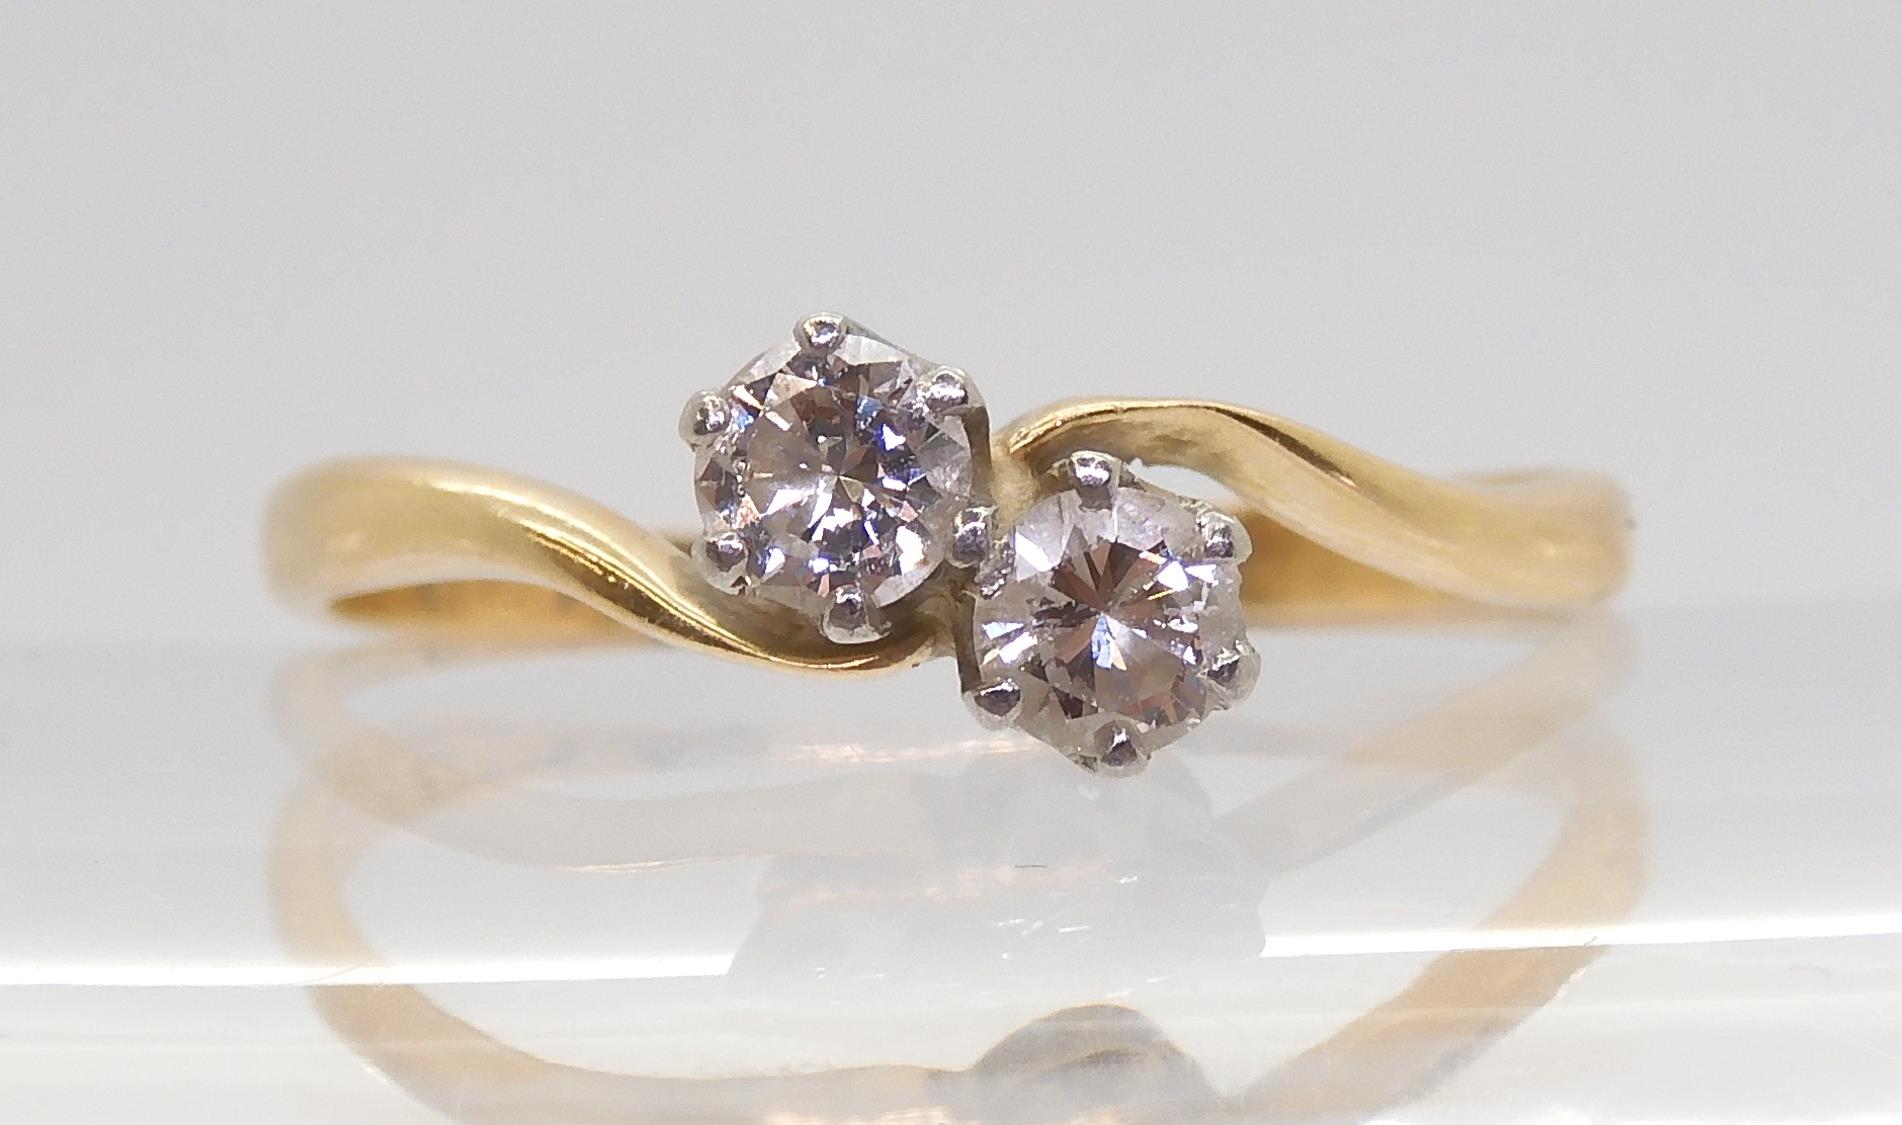 An 18ct gold twin stone diamond ring set with an estimated approx 0.33cts of brilliant cut